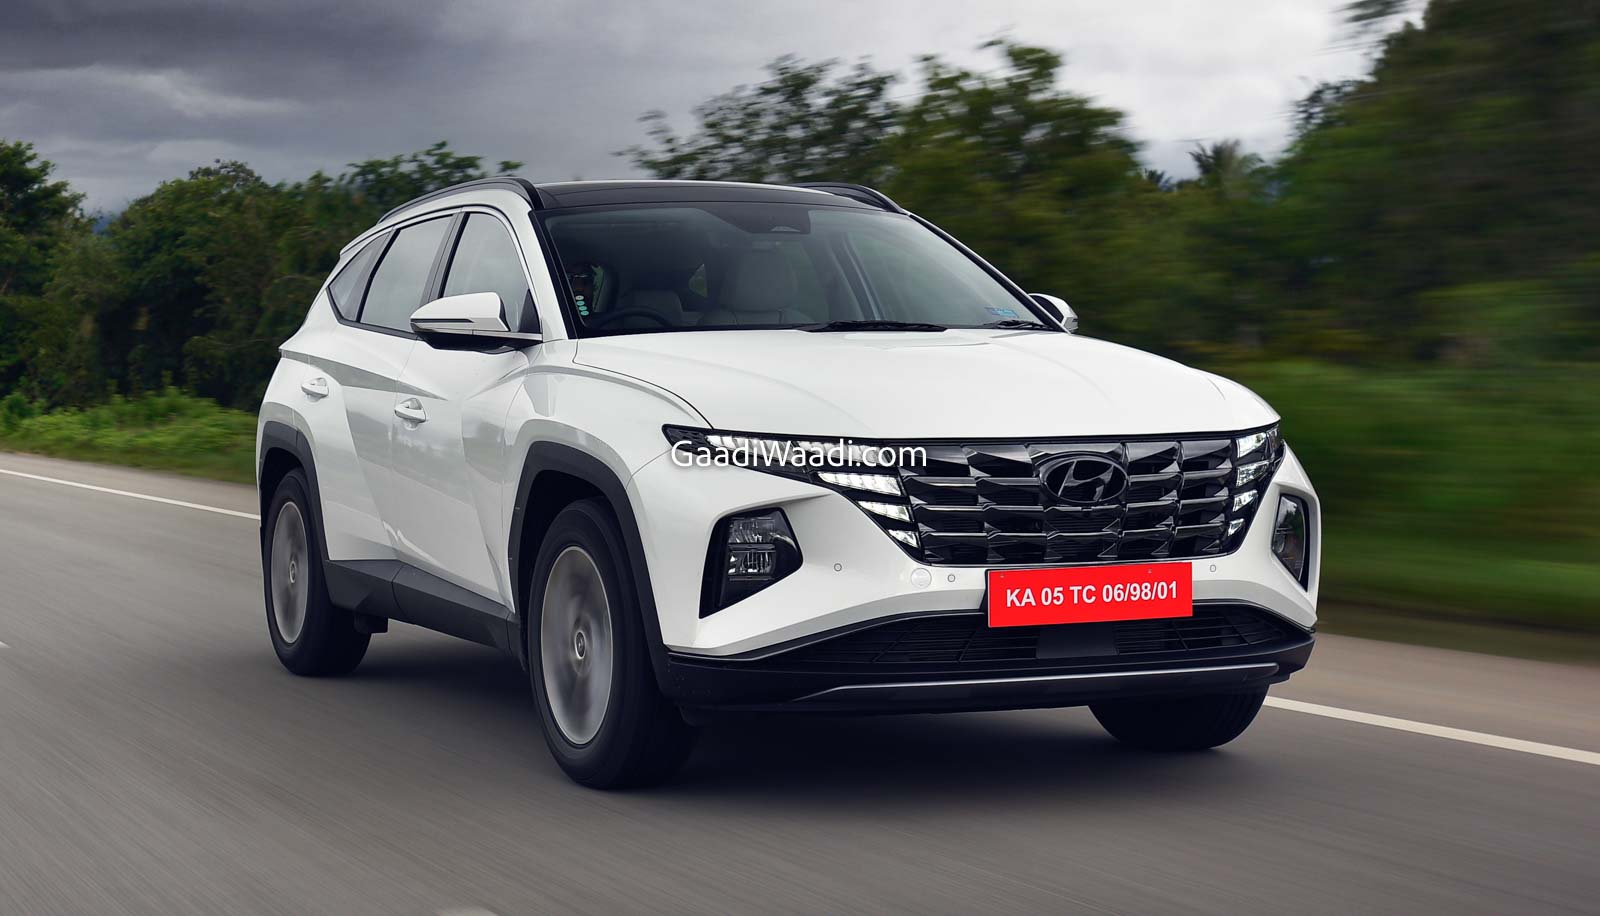 2023 Hyundai Tucson Launch This Year - Gets A Complete Makeover